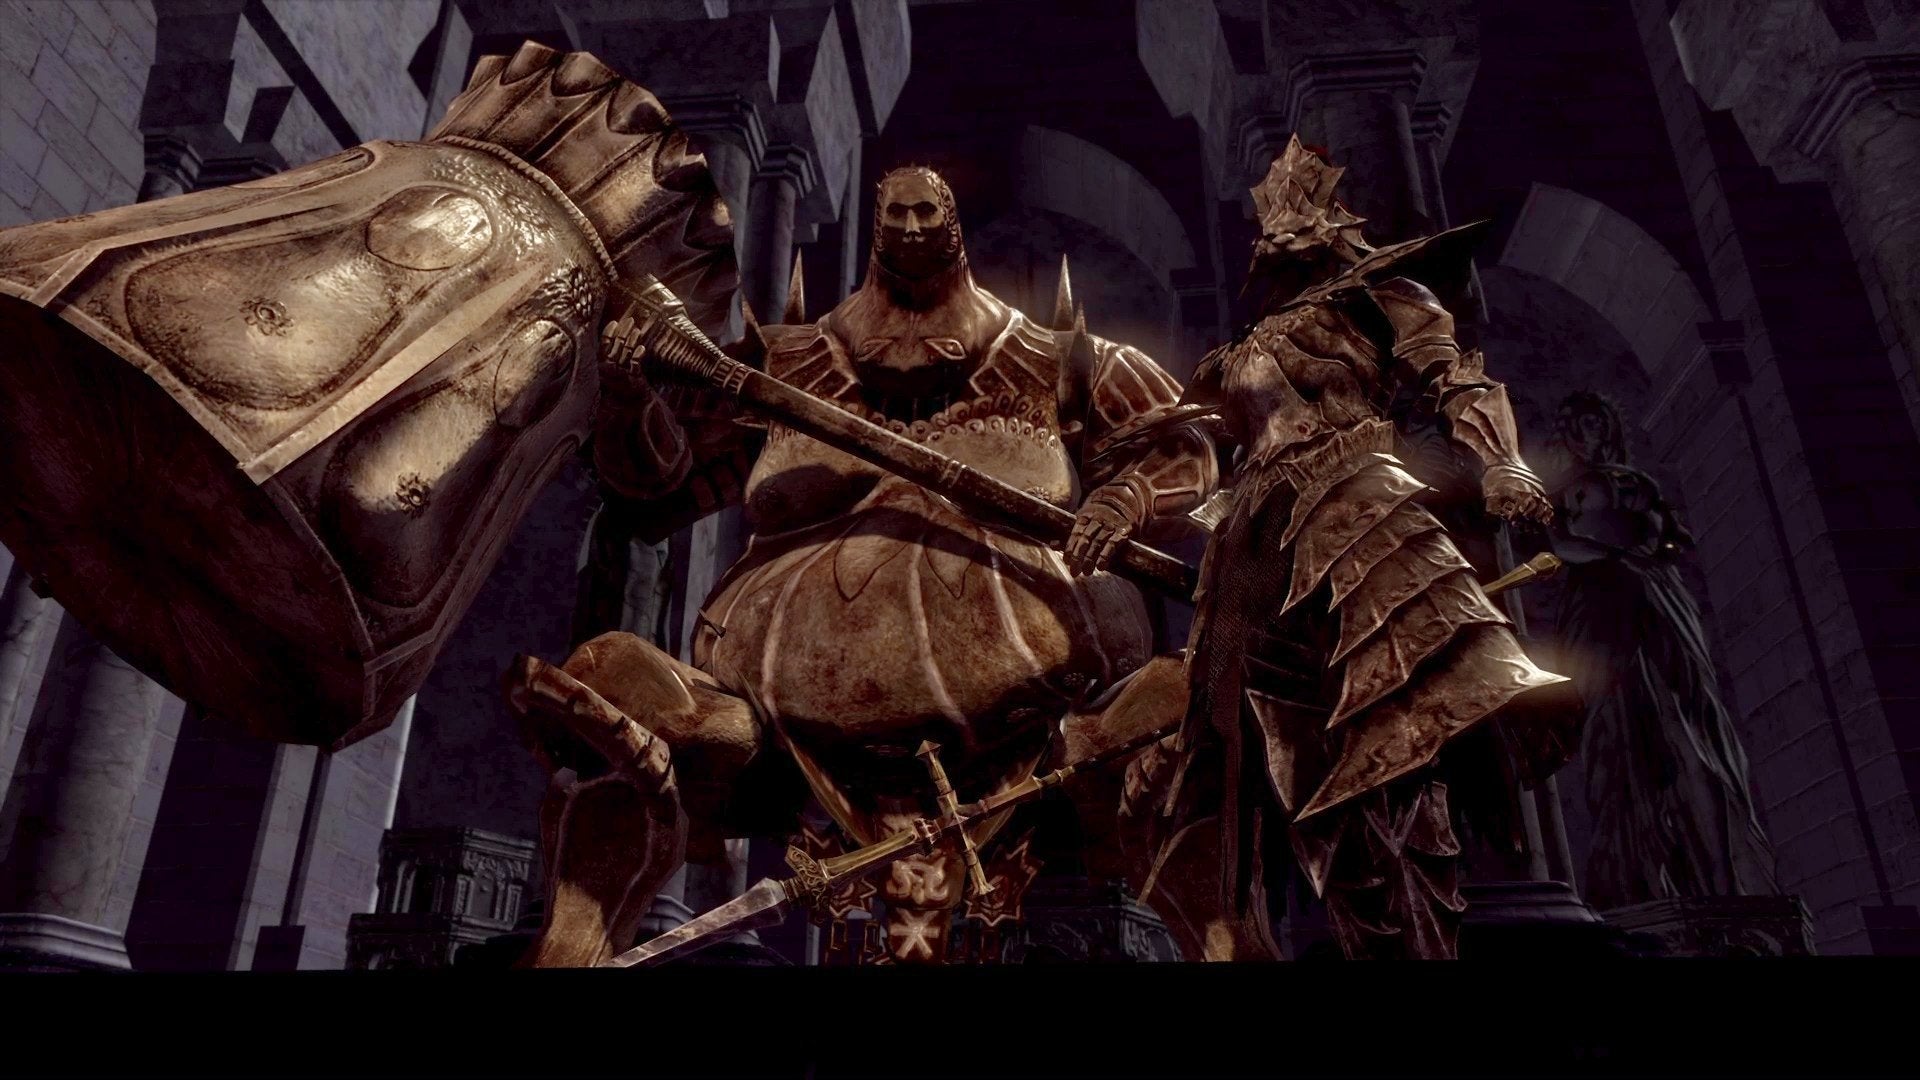 Ornstein and Smough from Dark Souls.